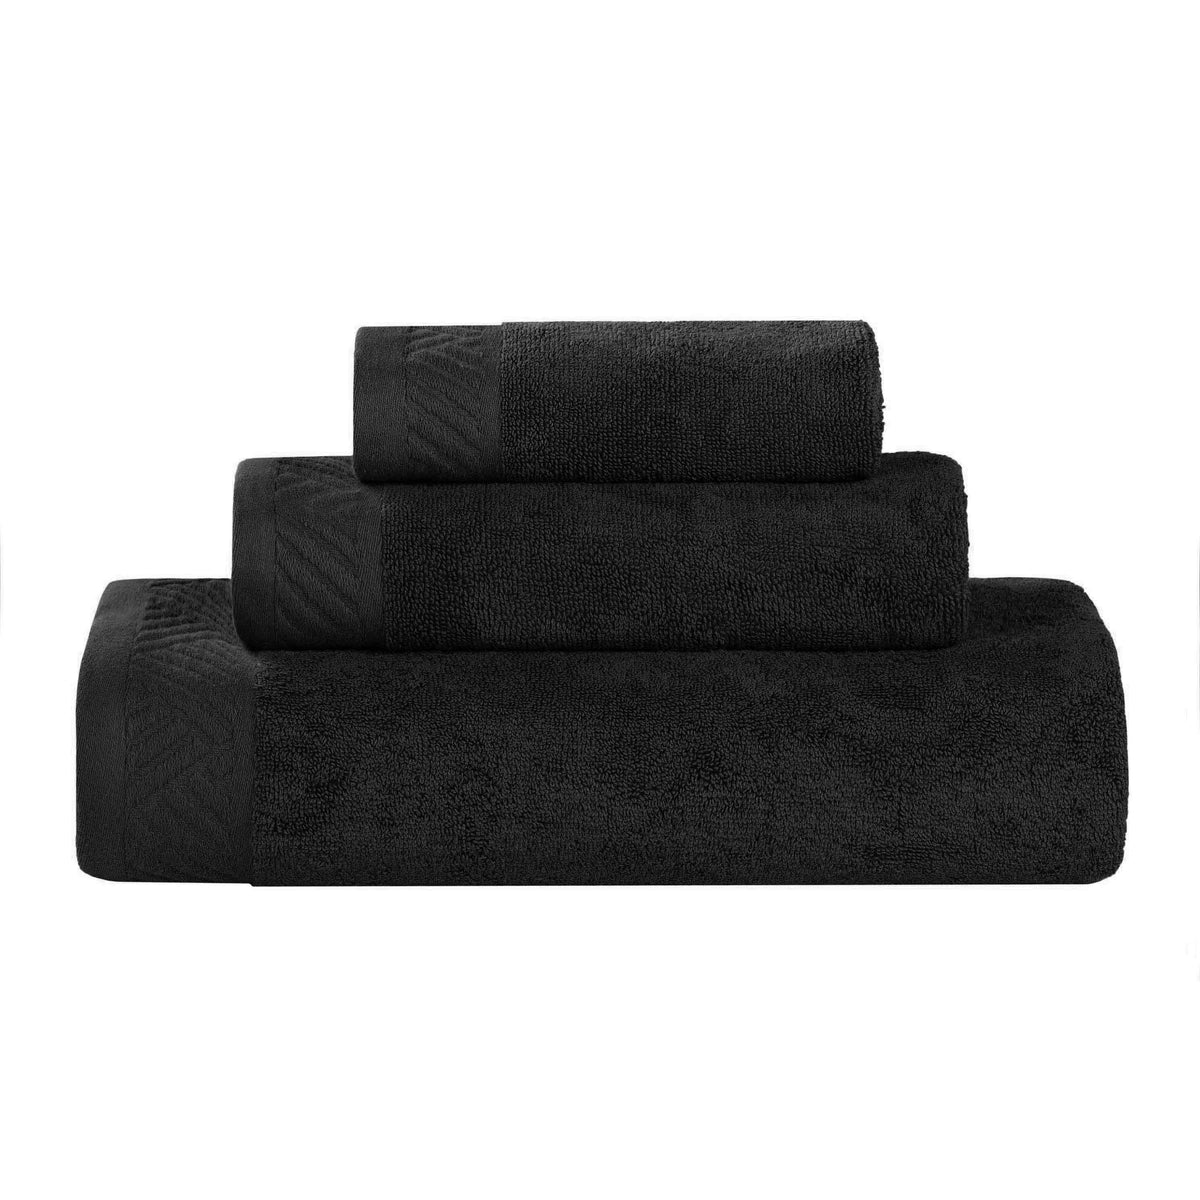 Basketweave Egyptian Cotton Solid 3 Piece Assorted Towel Set